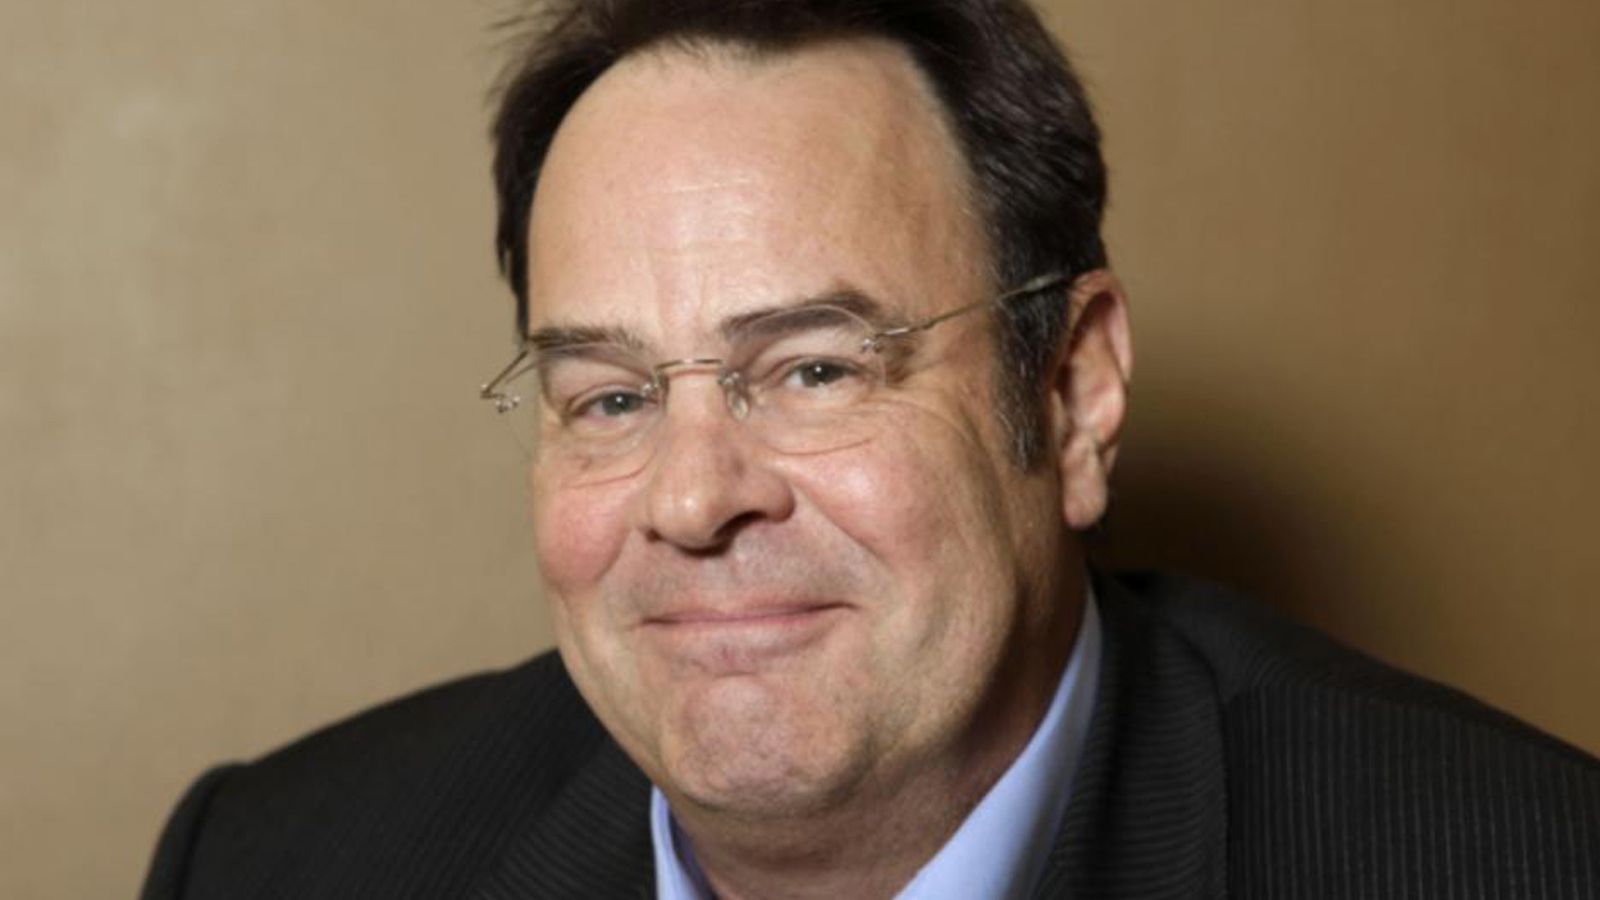 3. Dan Aykroyd - Best Tipper - The star of GHOSTBUSTERS among many other loved comedies is known to leave quite the gratuity. A waitress that often helps Aykroyd reported that he usually leaves her a hundred dollar bill or 50% of the cheque. That's one awesome, wild and crazy guy.  
